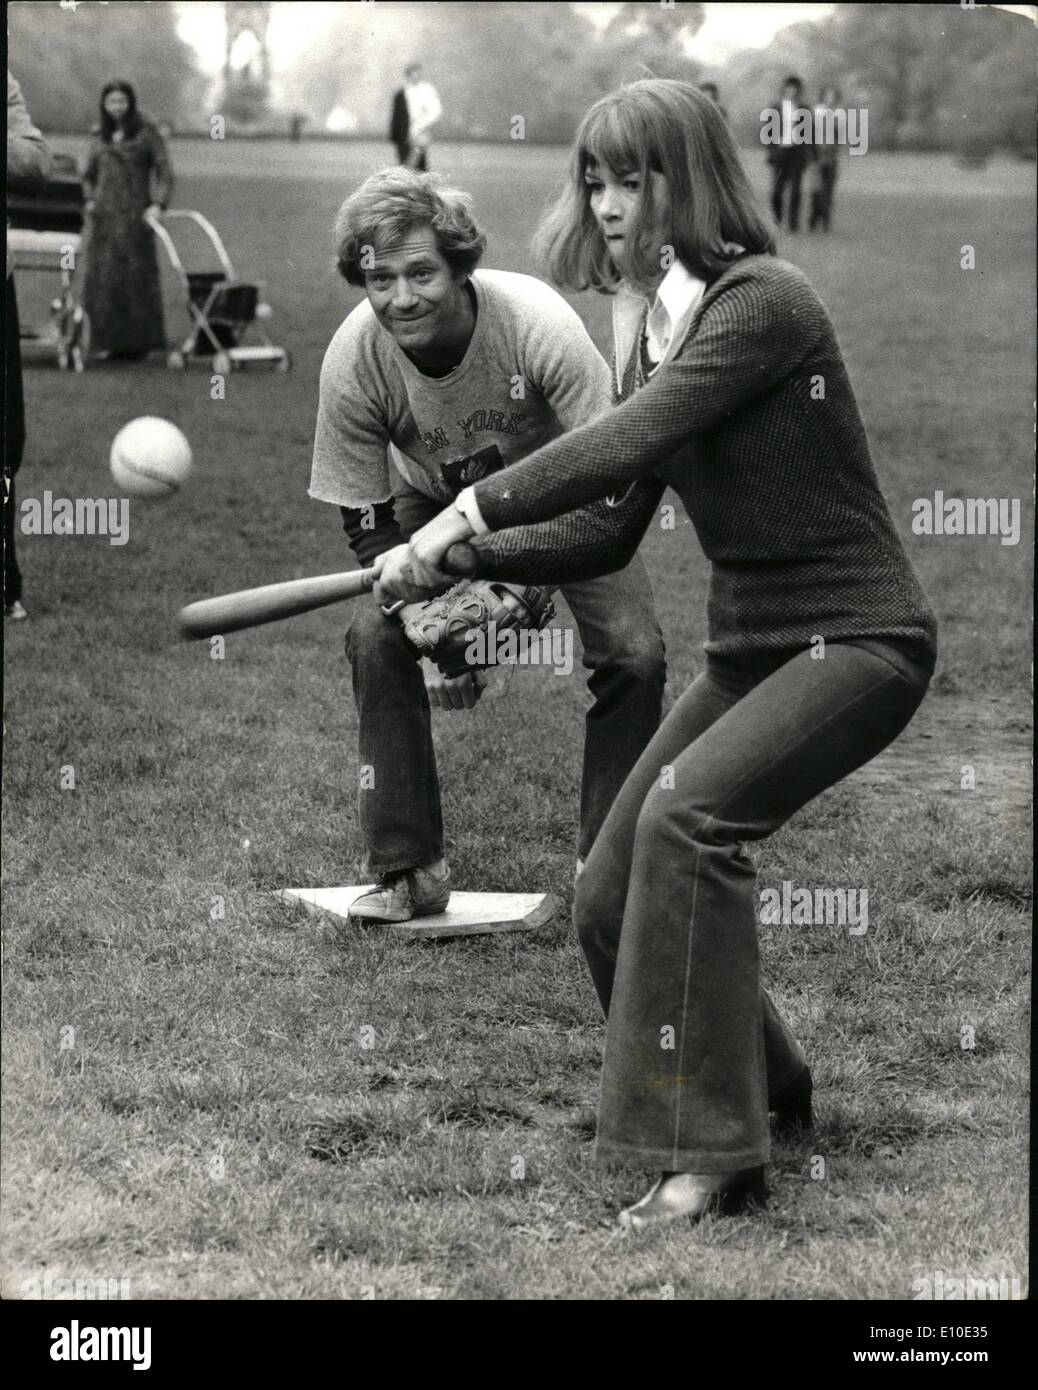 May 05, 1972 - Actress Glenda Jackson takes up American Baseball: Scenes were being shot in Hyde Park today filming sequences for the new Melvan Frank film ''A Tough of Class'' which started production this week. One of the film sequences being shot was a group of Americans playing a baseball game in which Glenda Jackson, (making her screen romantic comedy debut) and her co-star George Segal took part. Photo shows with George Segal behind Glenda Jackson makes a strike during the baseball game today. Stock Photo